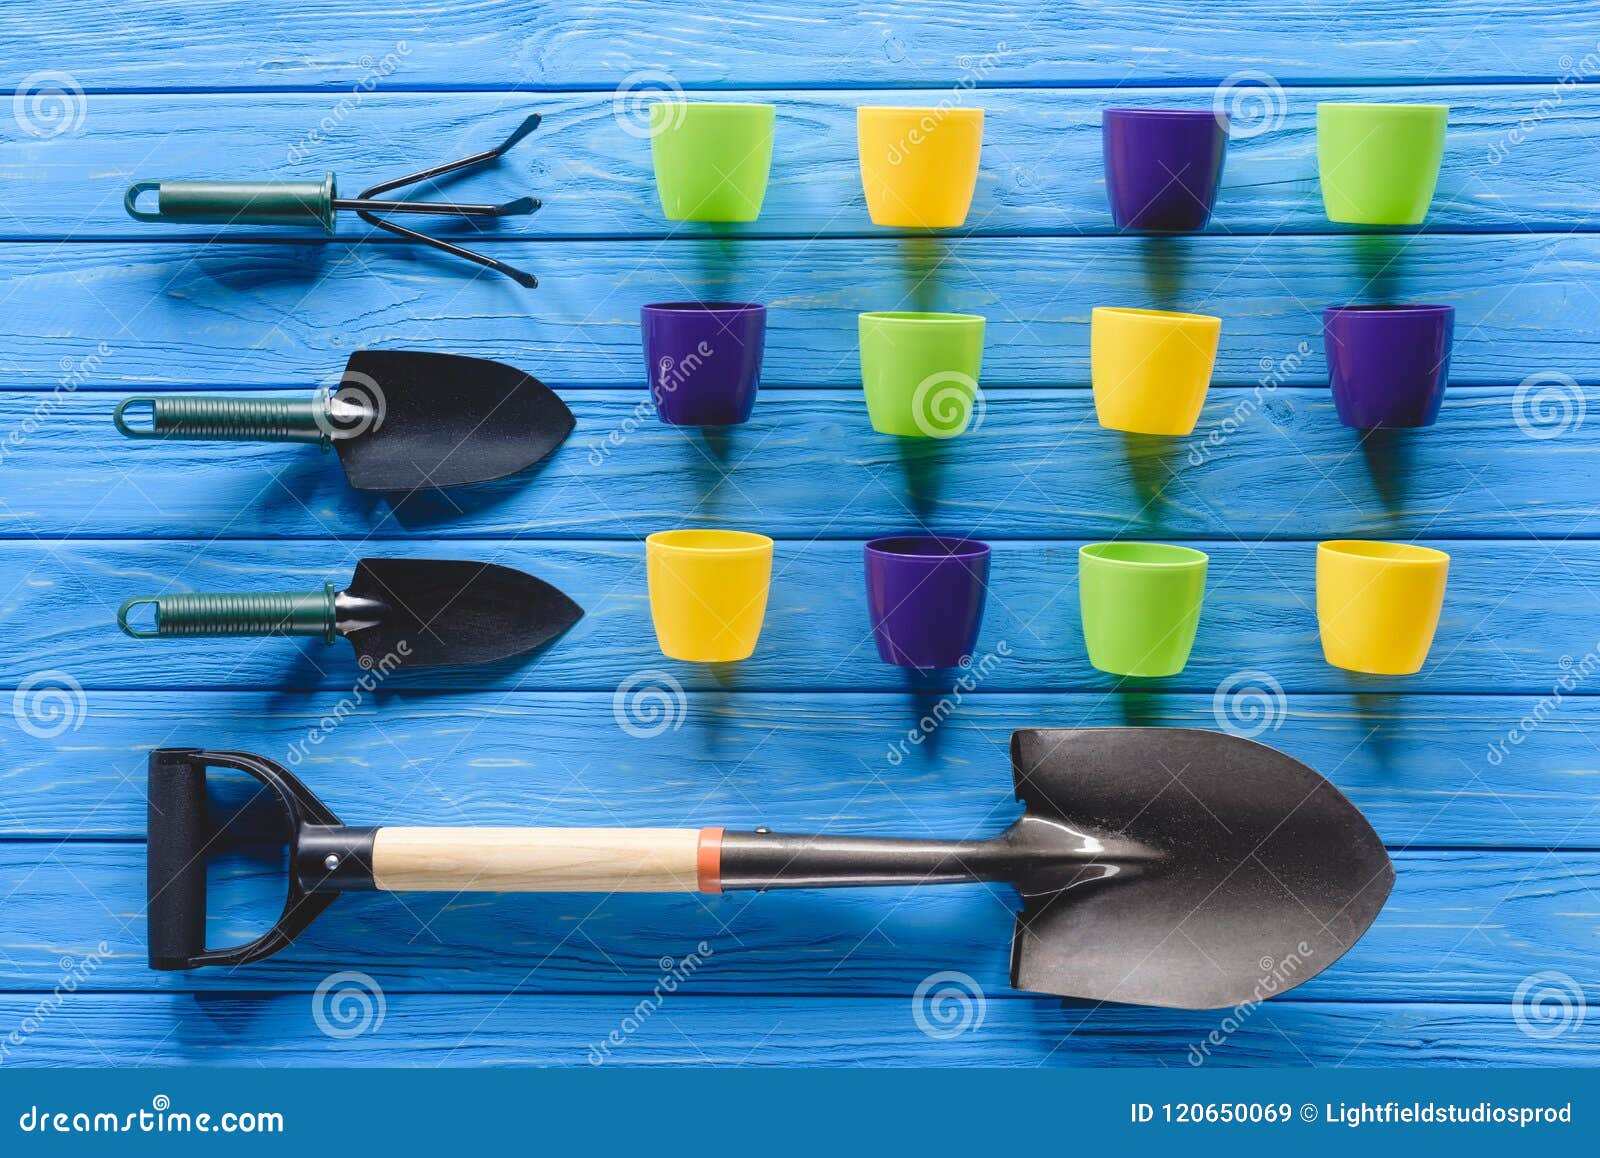 Top View of Colorful Flower Pots in Row and Gardening Equipment on Blue ...